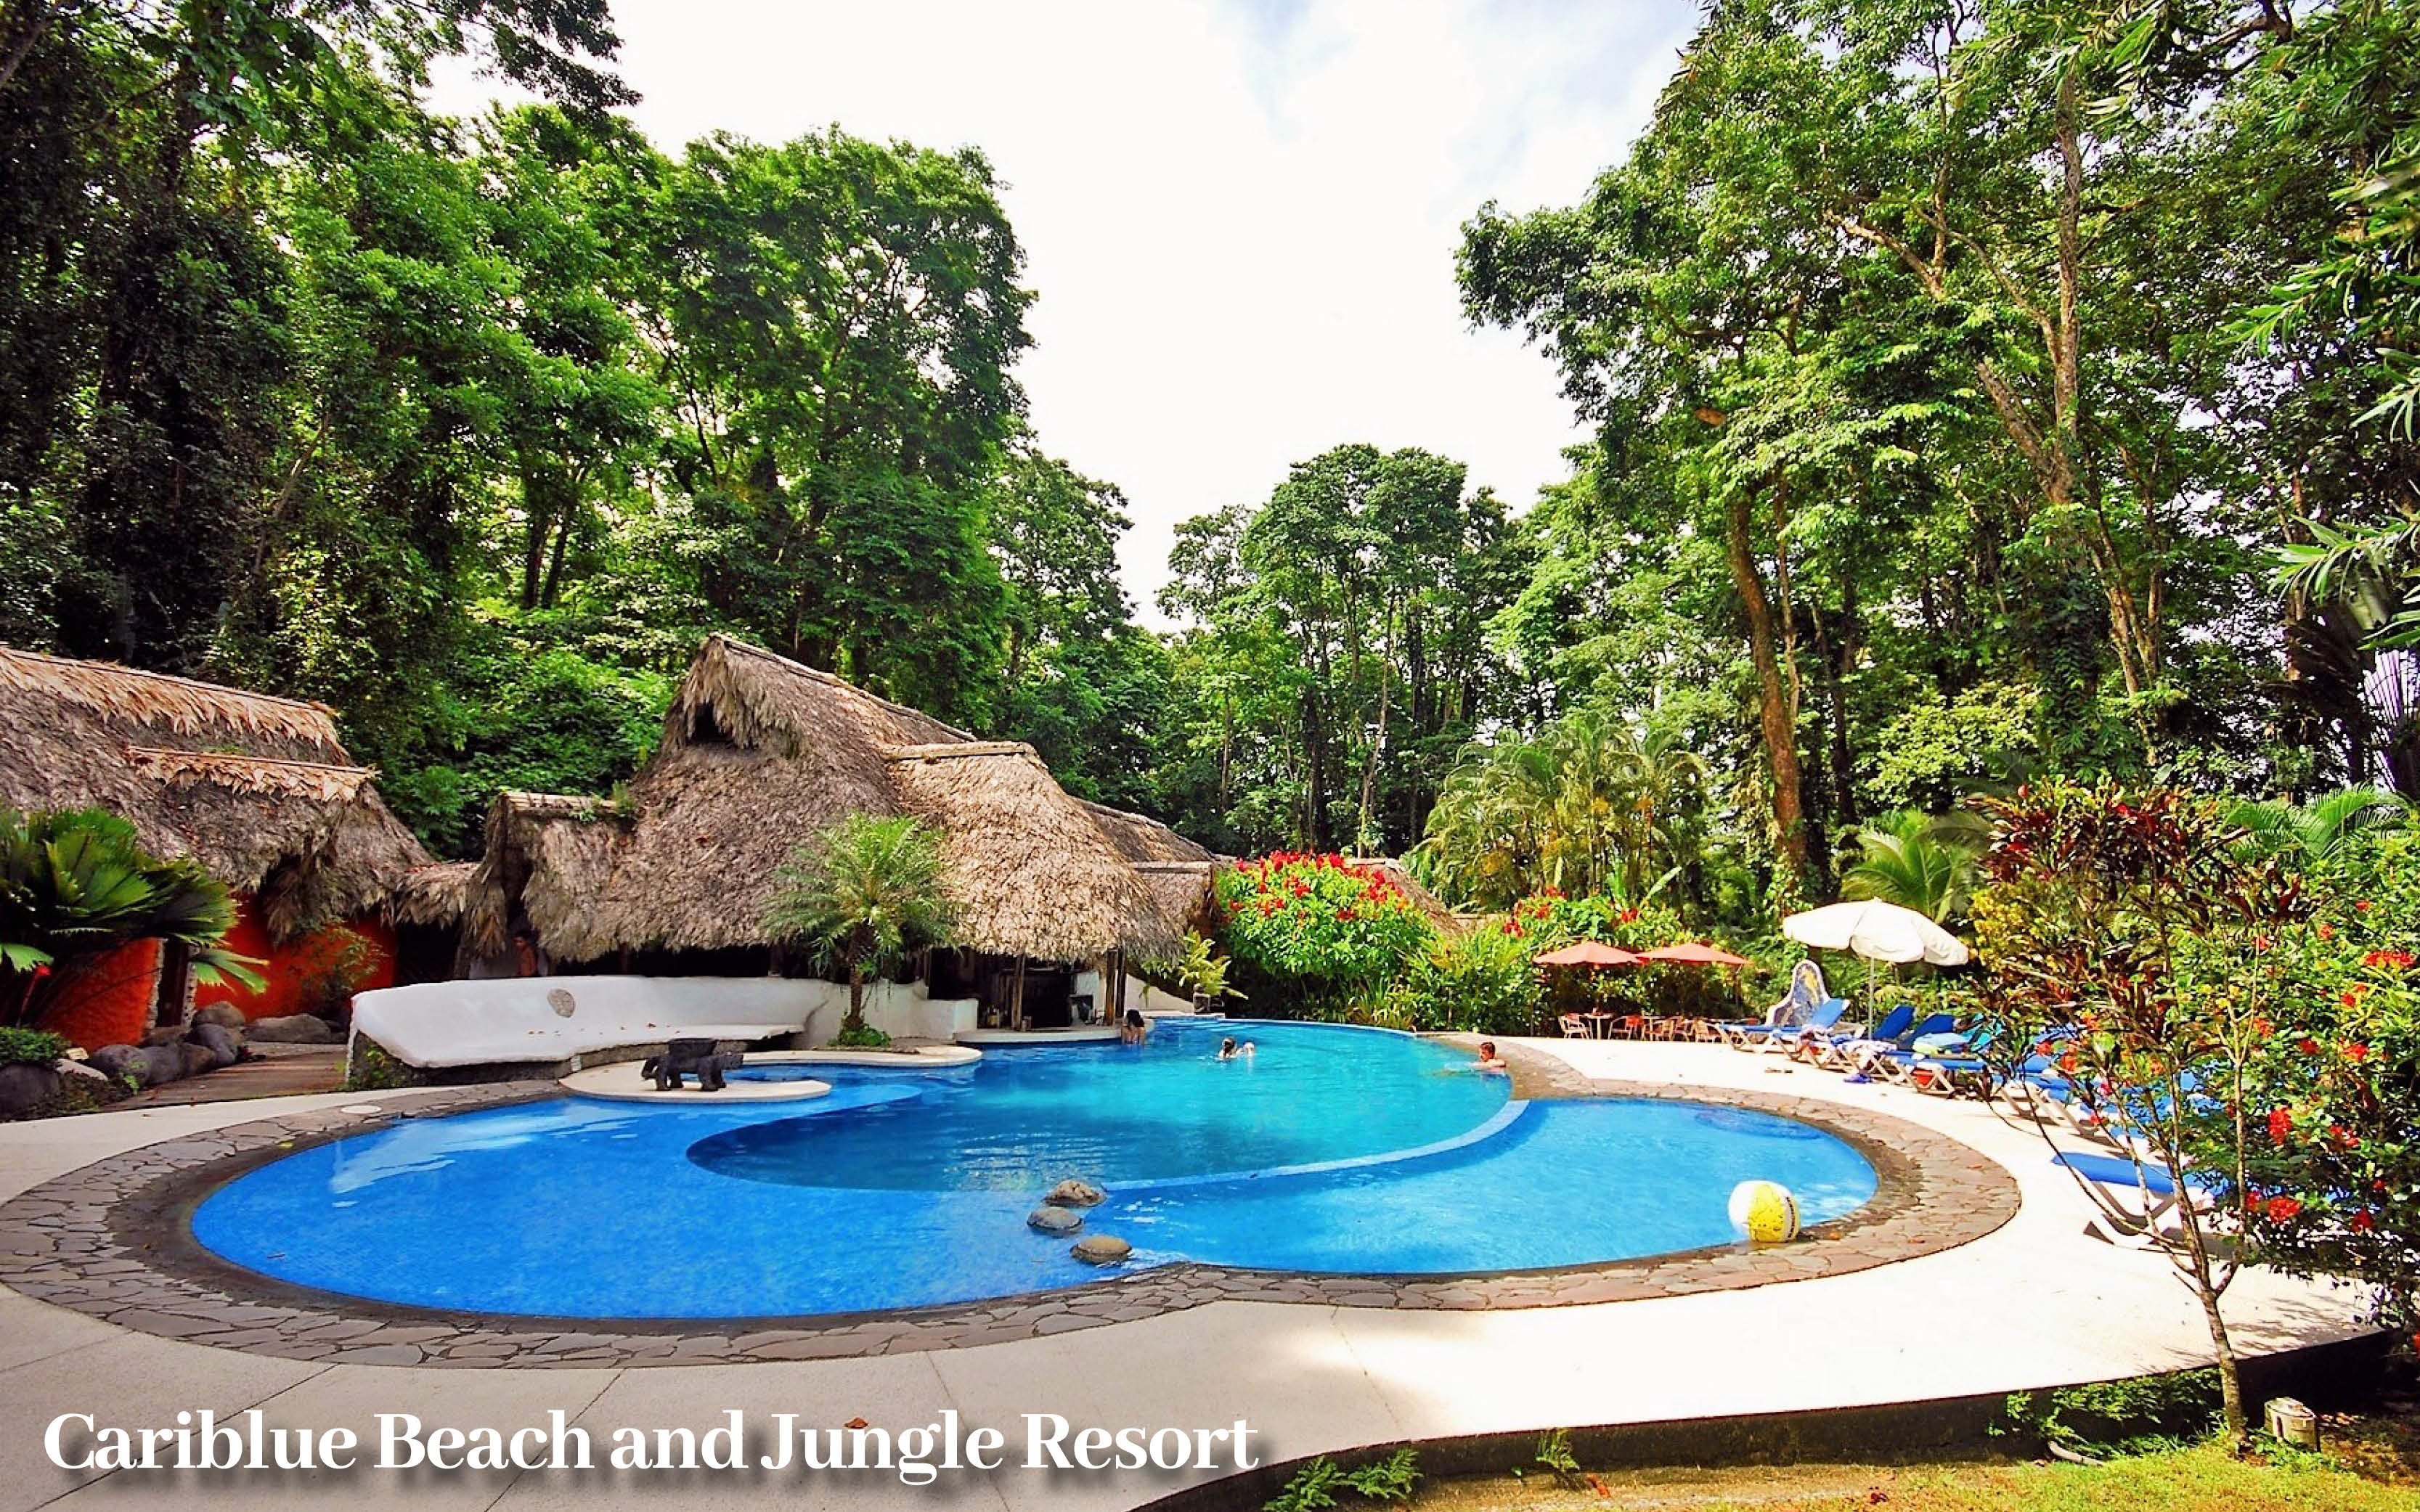 Costa Rica family holiday offer13